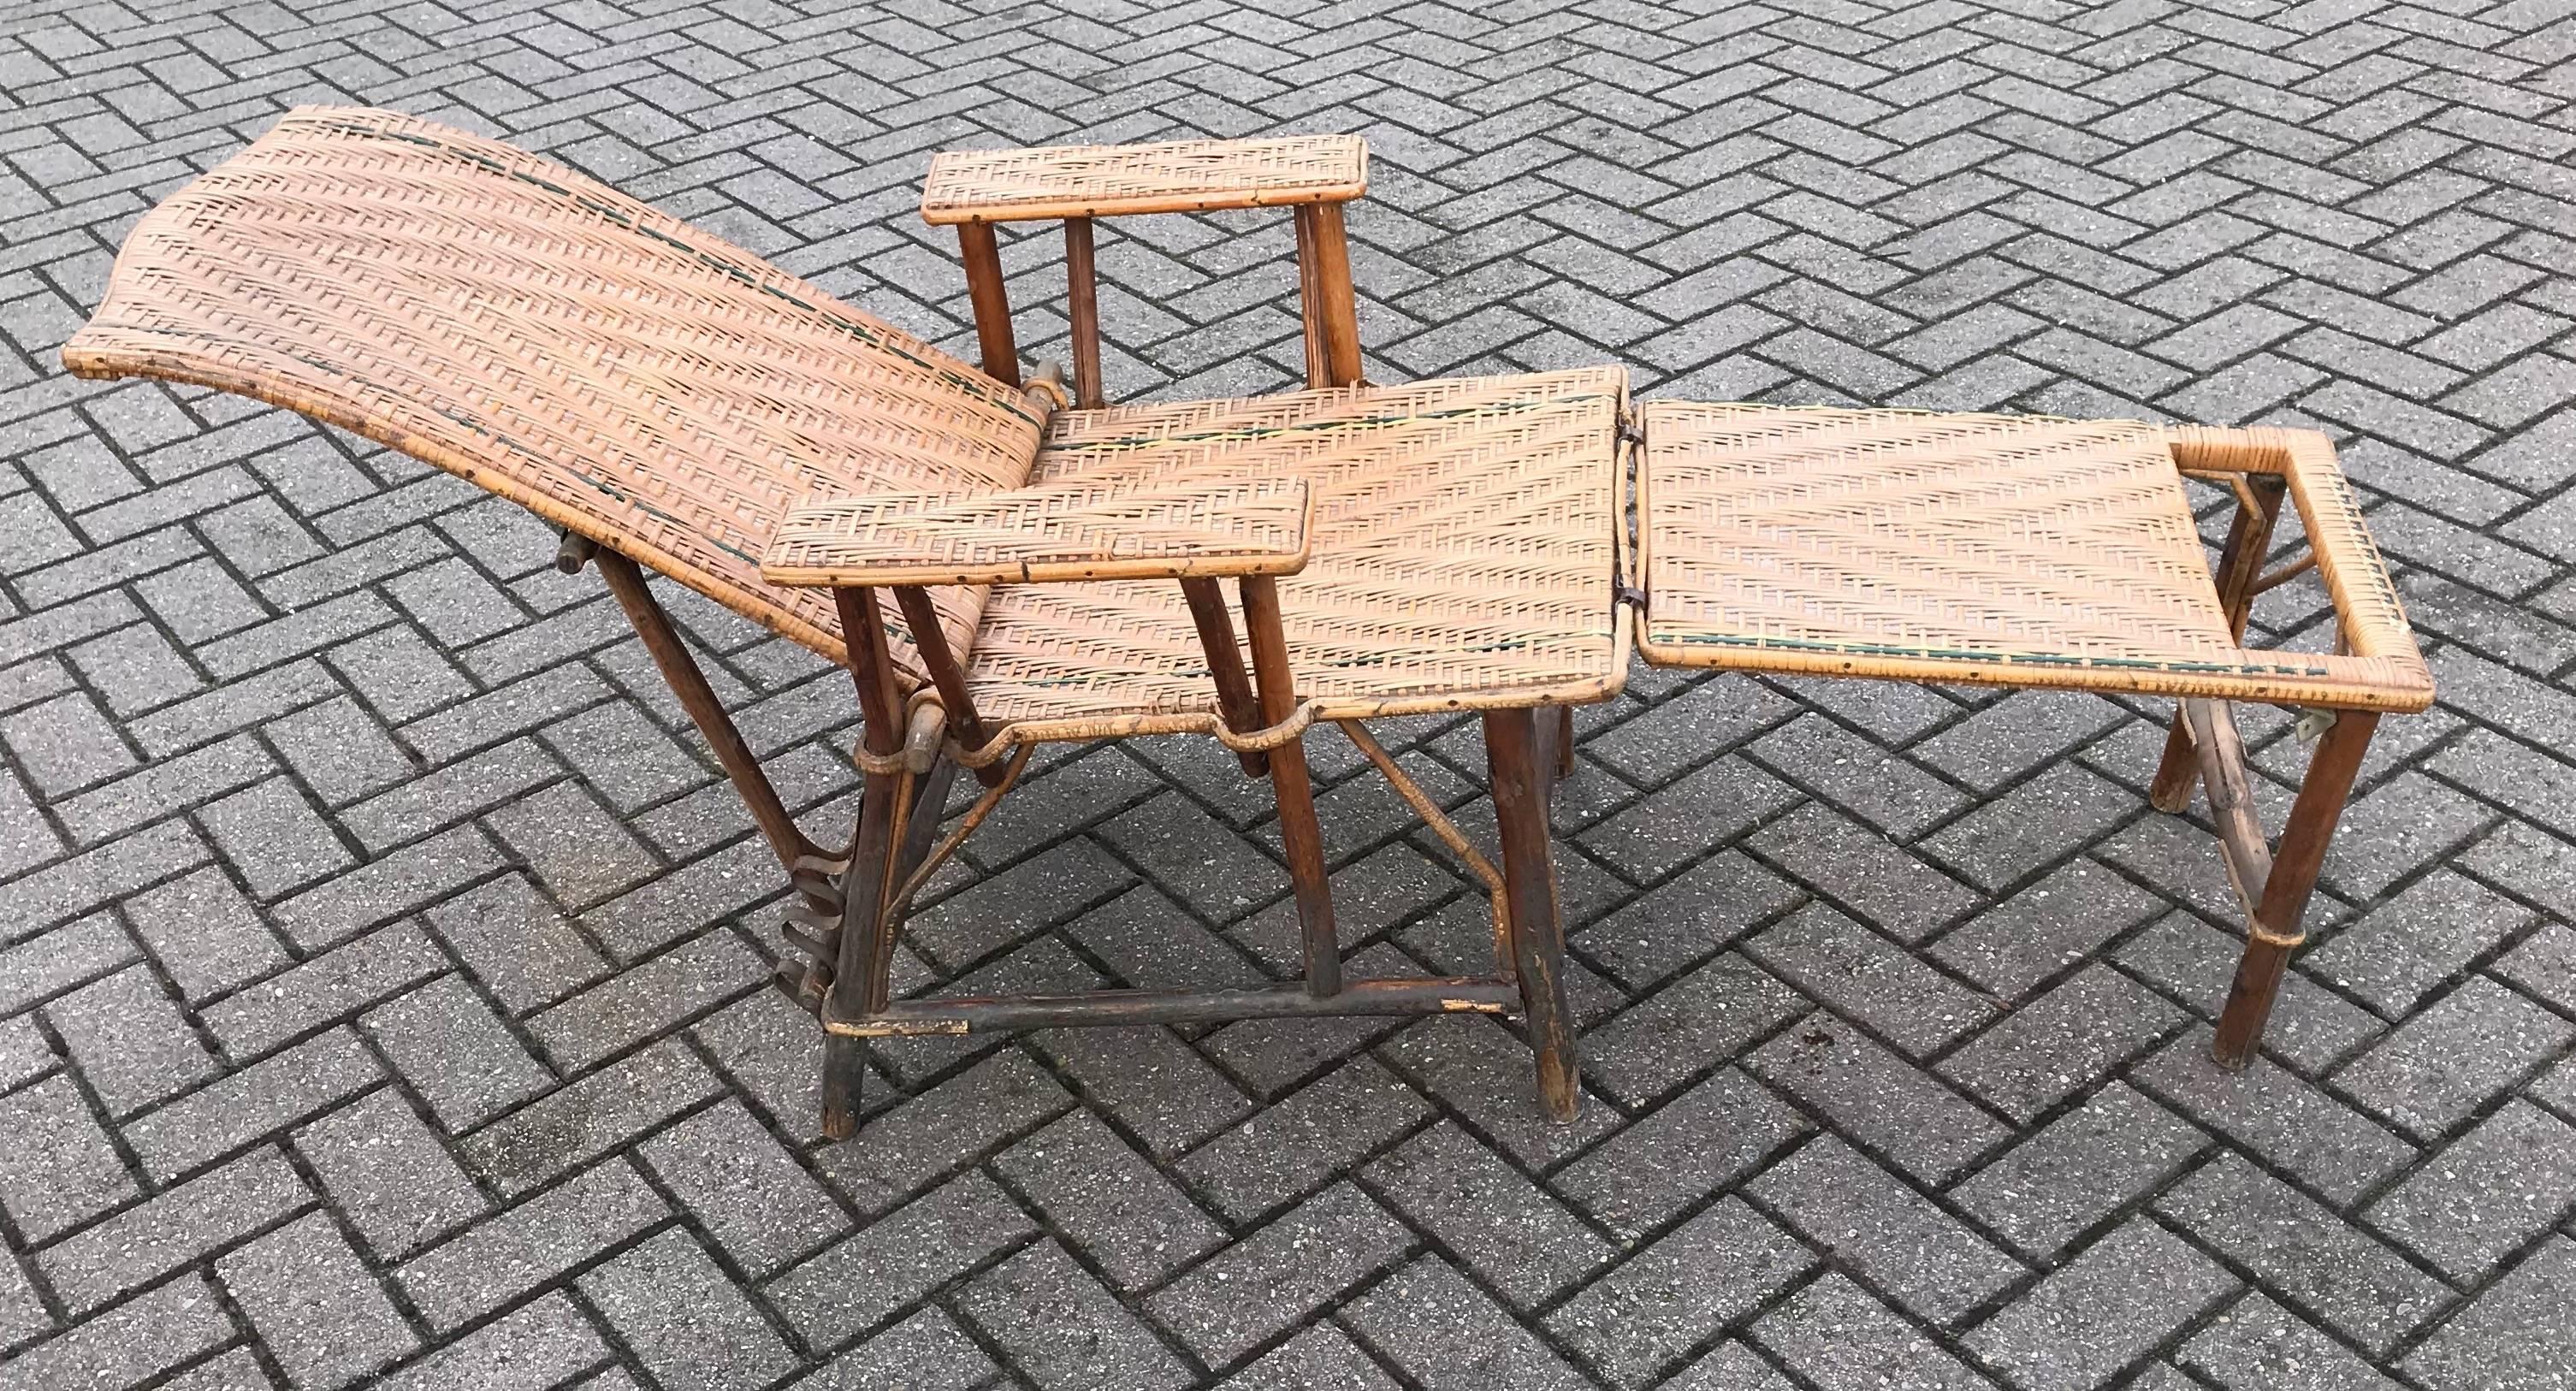 Cane Antique Rattan and Wood Deck Chair or Lounge Chair